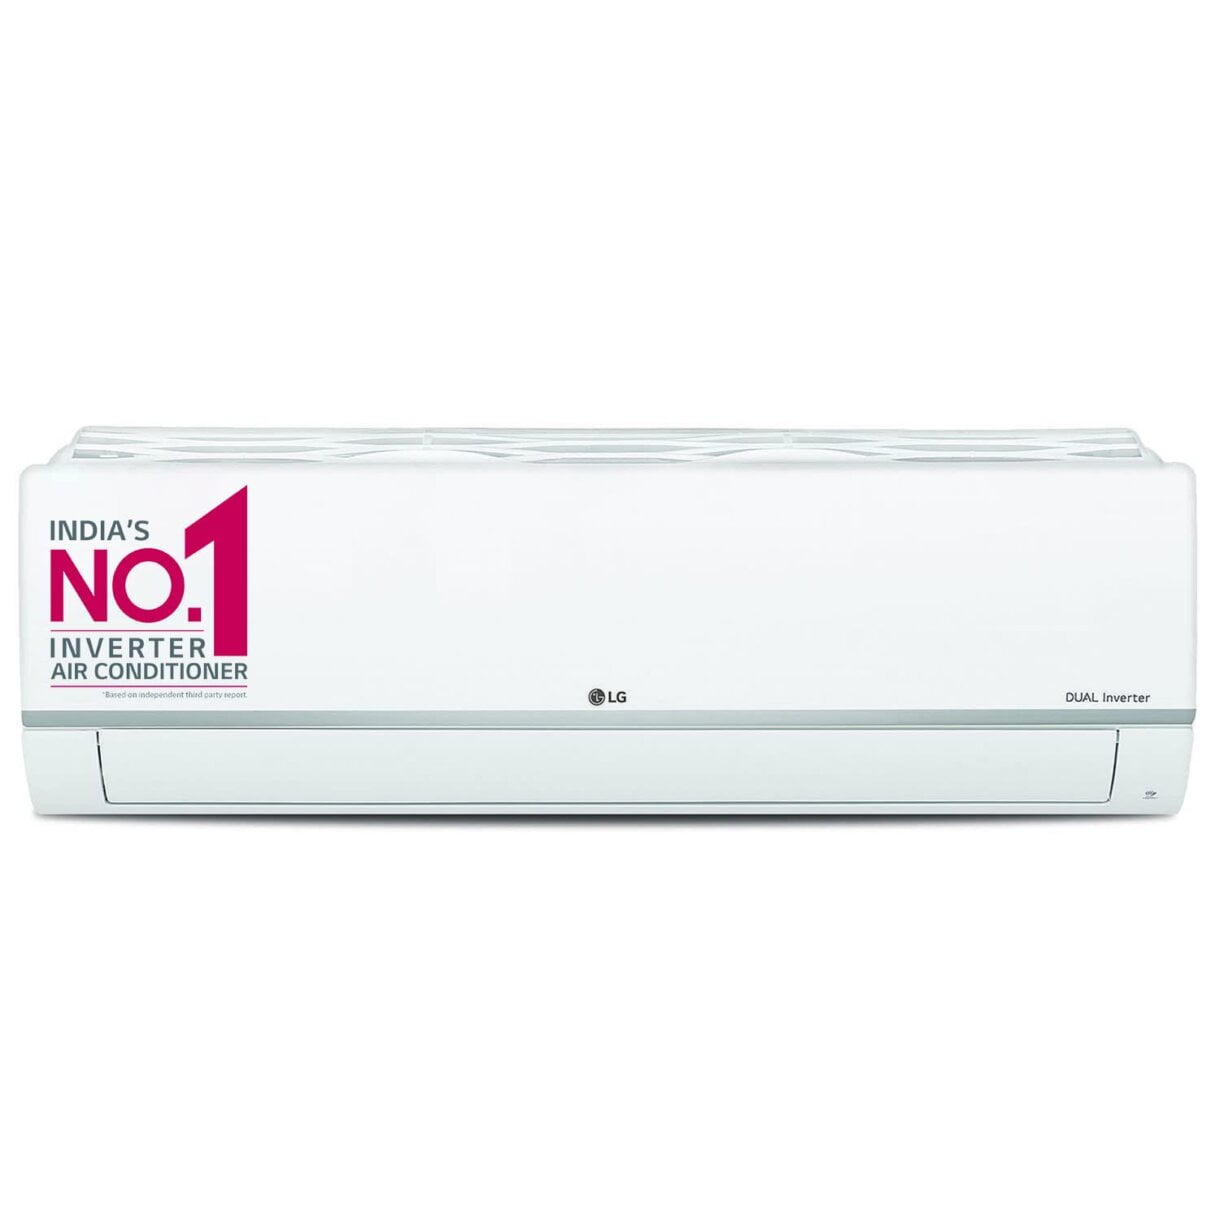 LG 1 Ton 5 Star AI DUAL Inverter Split AC (Copper, Super Convertible 6-in-1 Cooling, HD Filter with anti-virus protection, 2022 Model, PS-Q14SNZE, White)